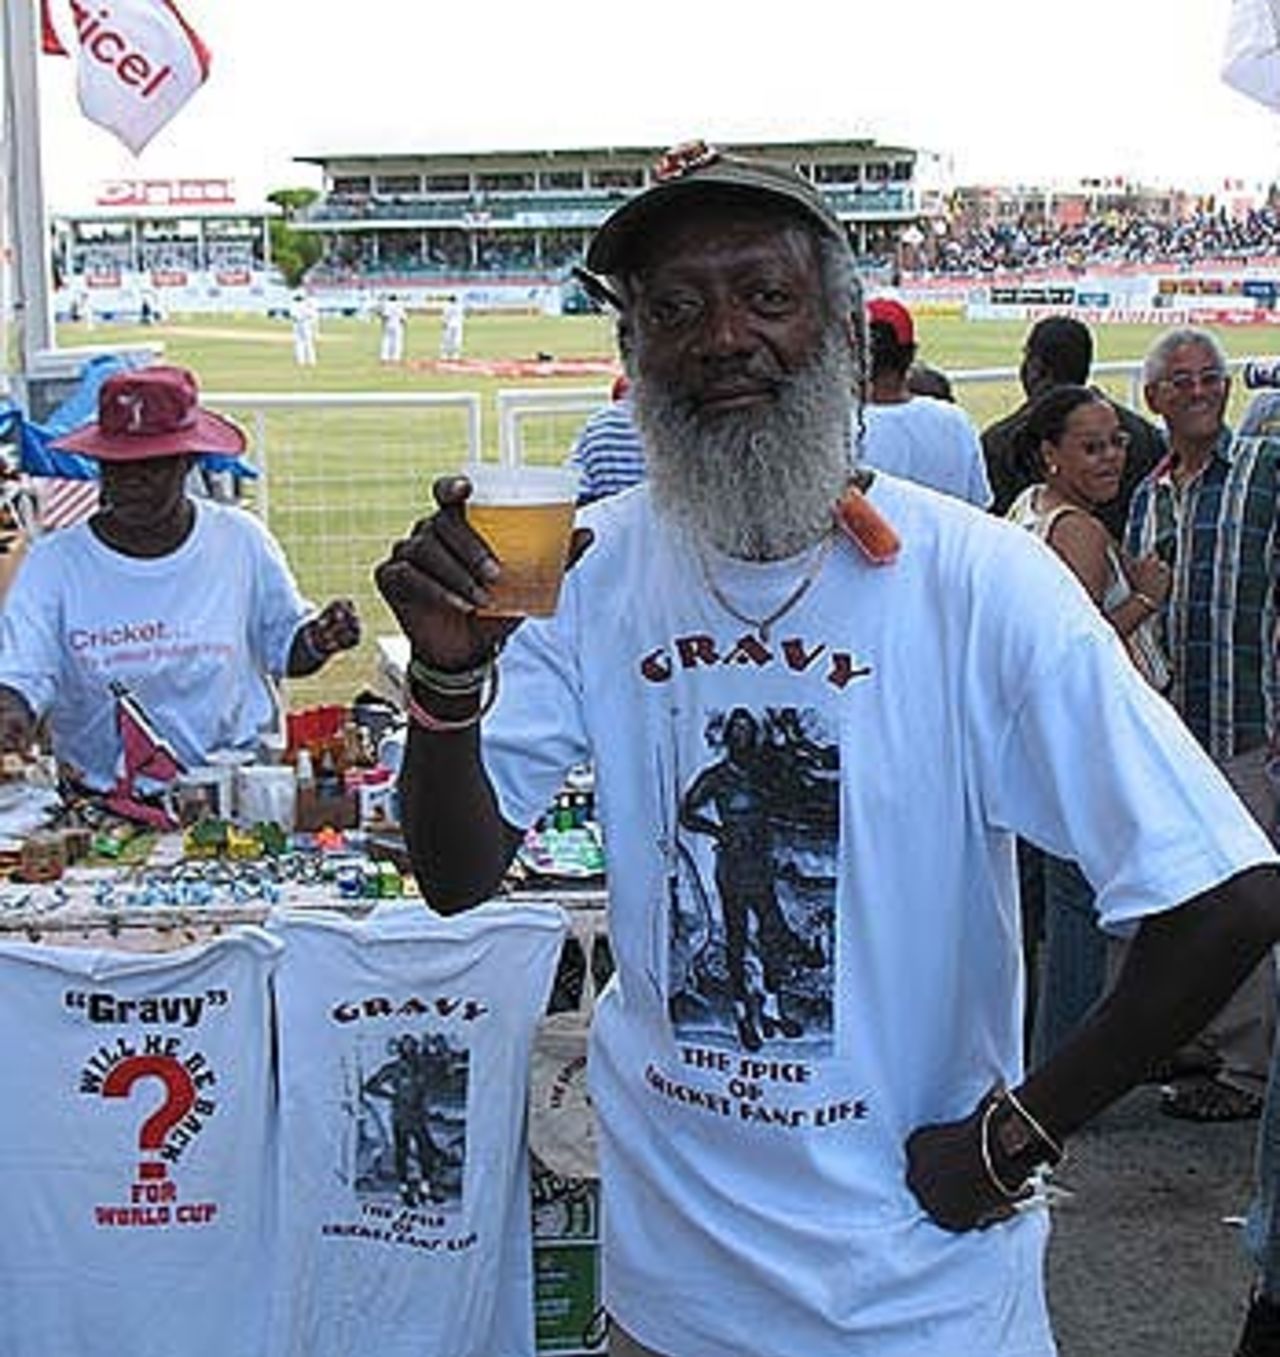 Labon Kenneth Blackburn Leeweltine Buckonon Benjamin, or Gravy to the cricketing world, is one of the most famous characters at the Antigua Recreation Ground